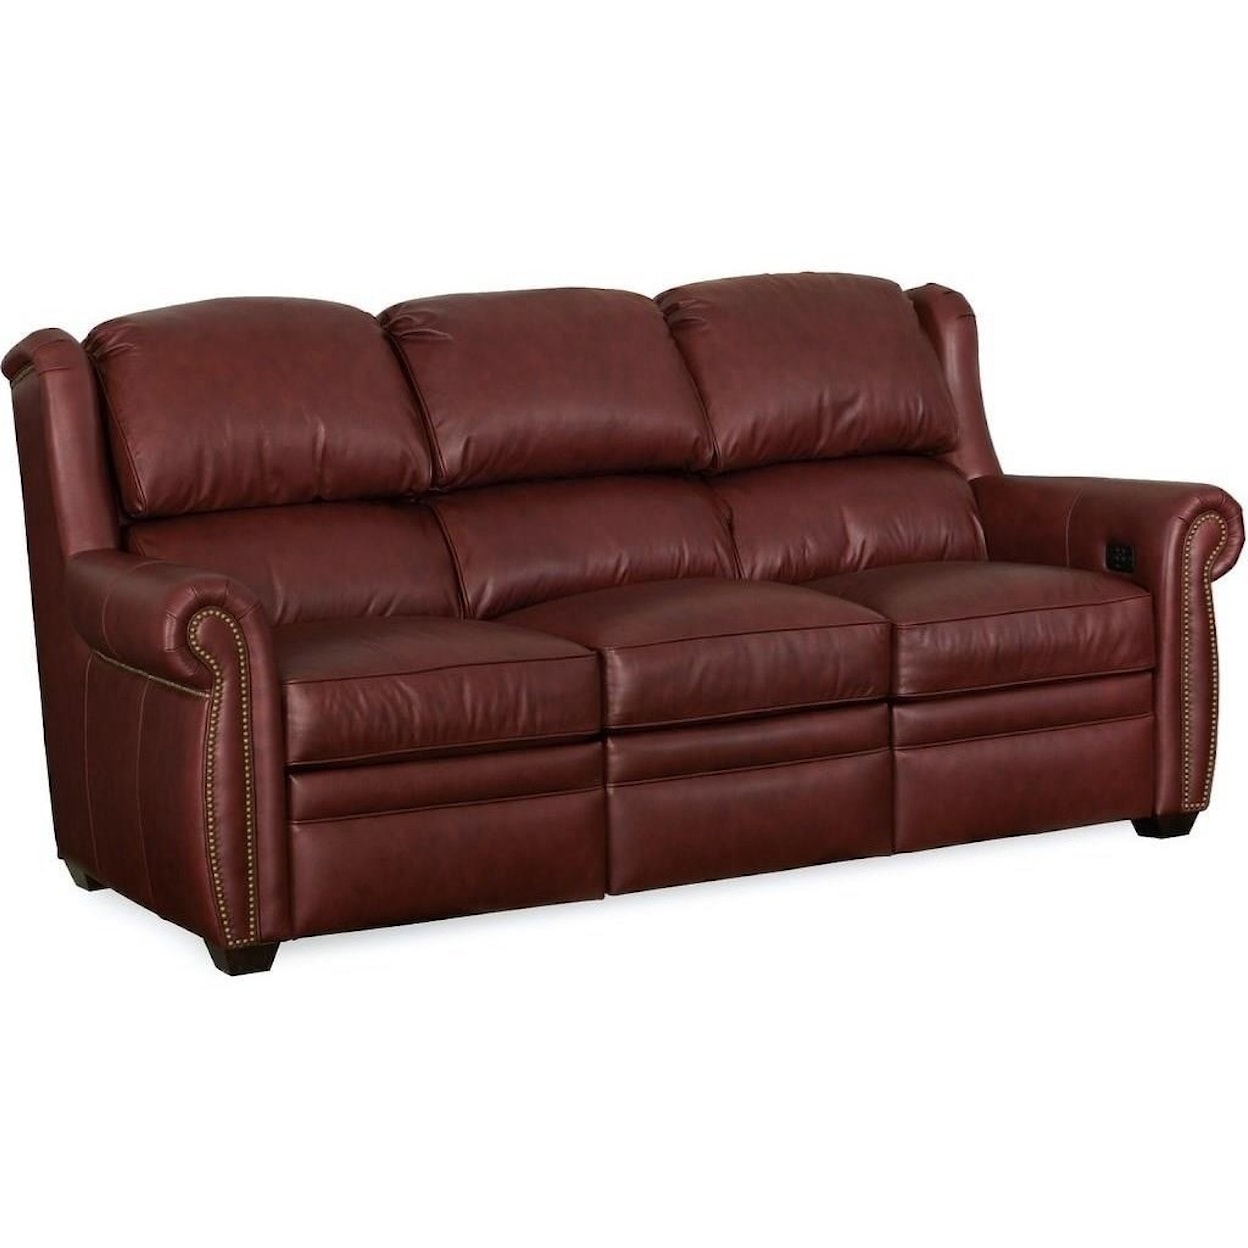 Bradington Young Discovery Power Sofa with Power Headrests